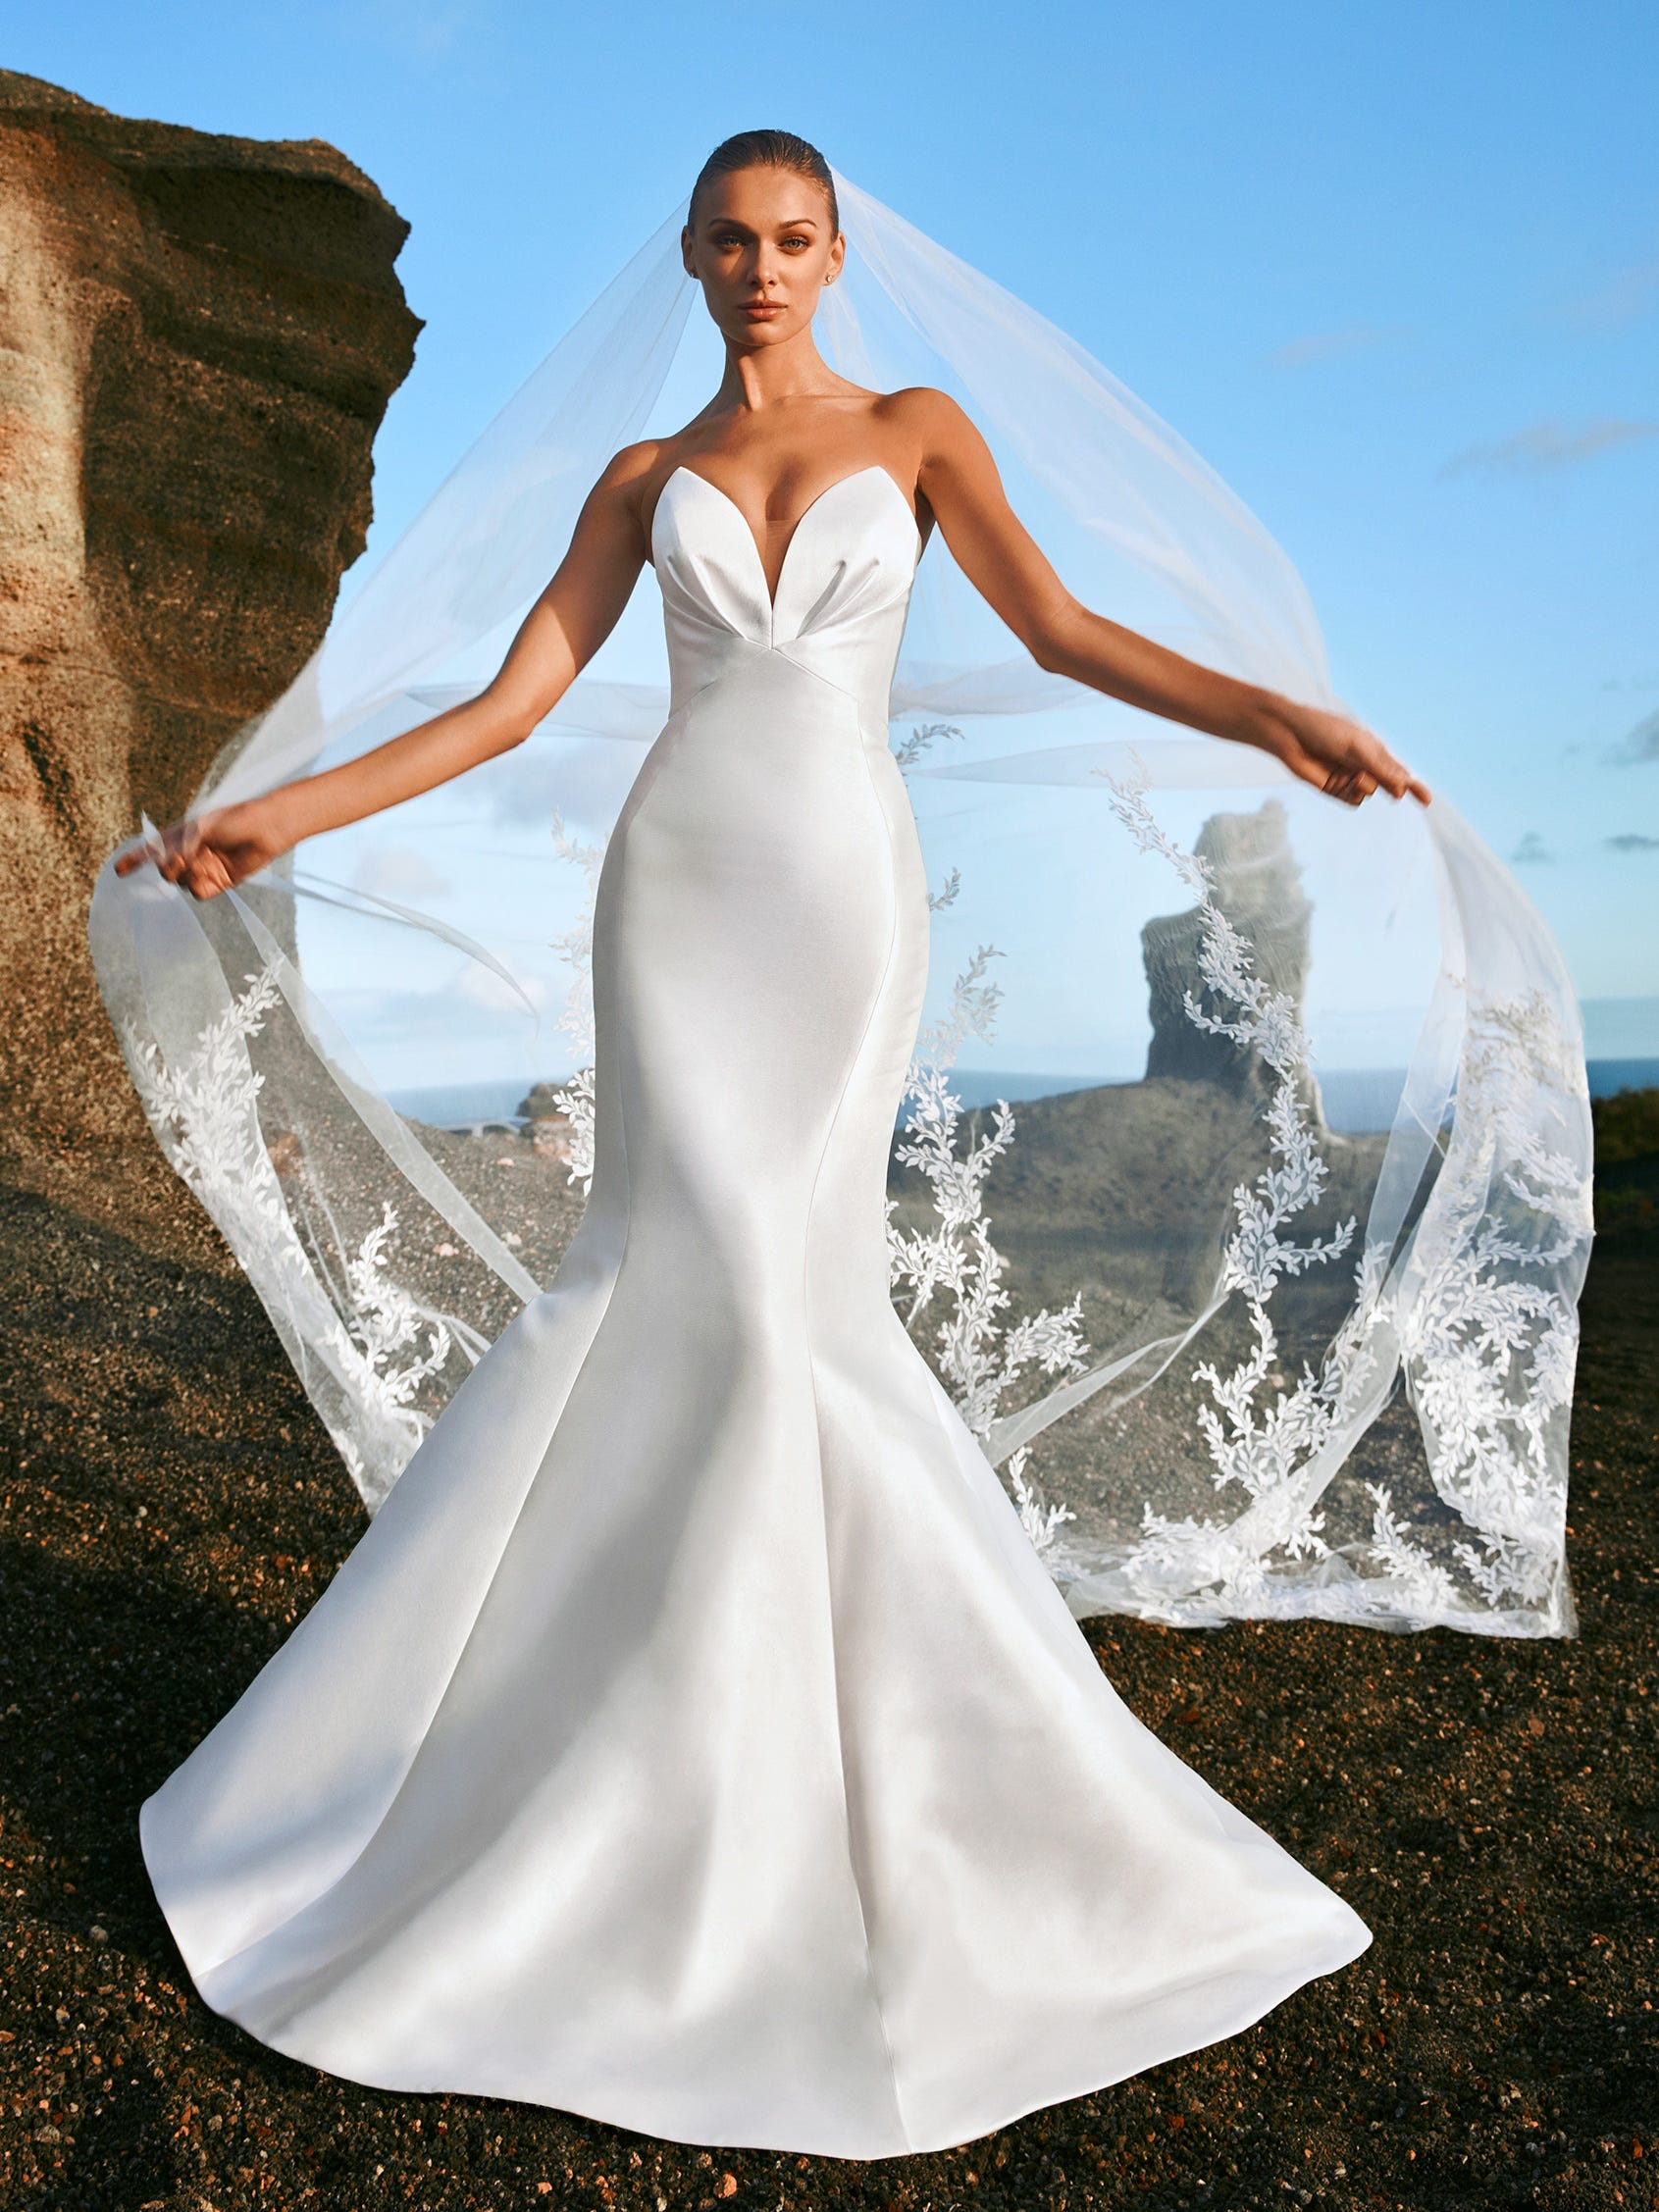 ENIO Wedding Dress by Pronovias Mermaid Mikado wedding dress with Bardot  neckline and low corset back (Available Online Only)